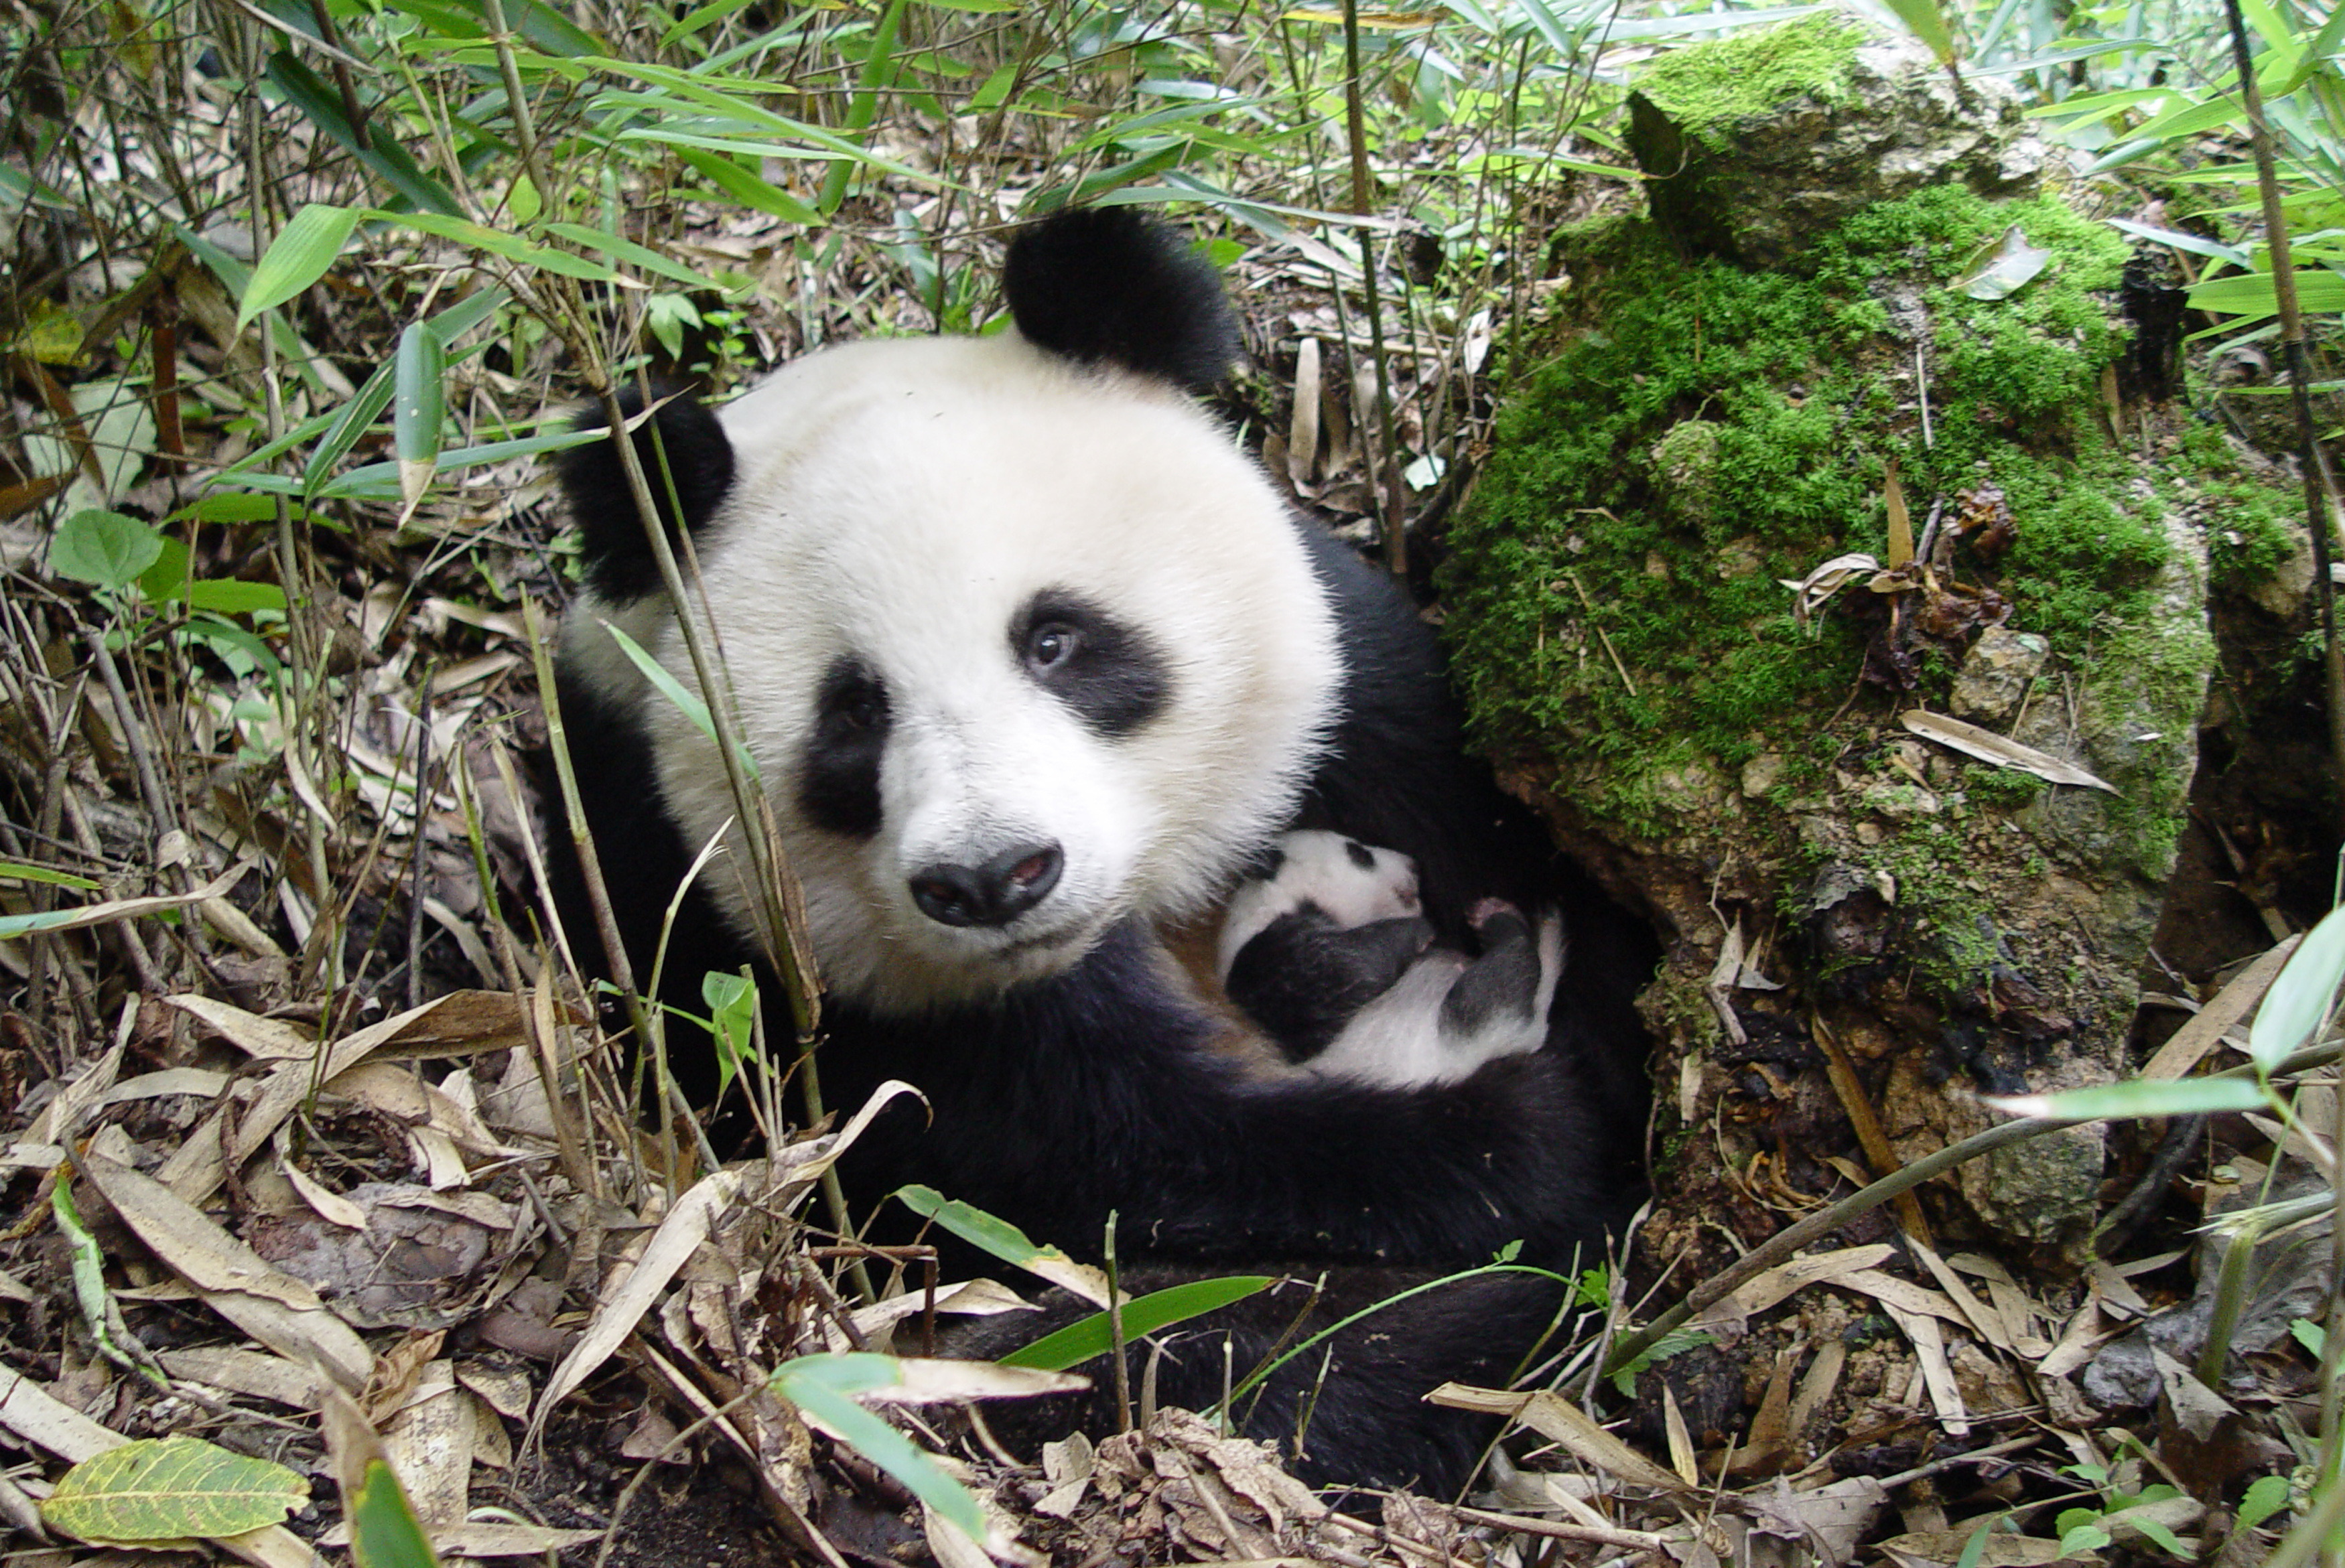 Giant panda no longer endangered, but iconic species still at risk ...